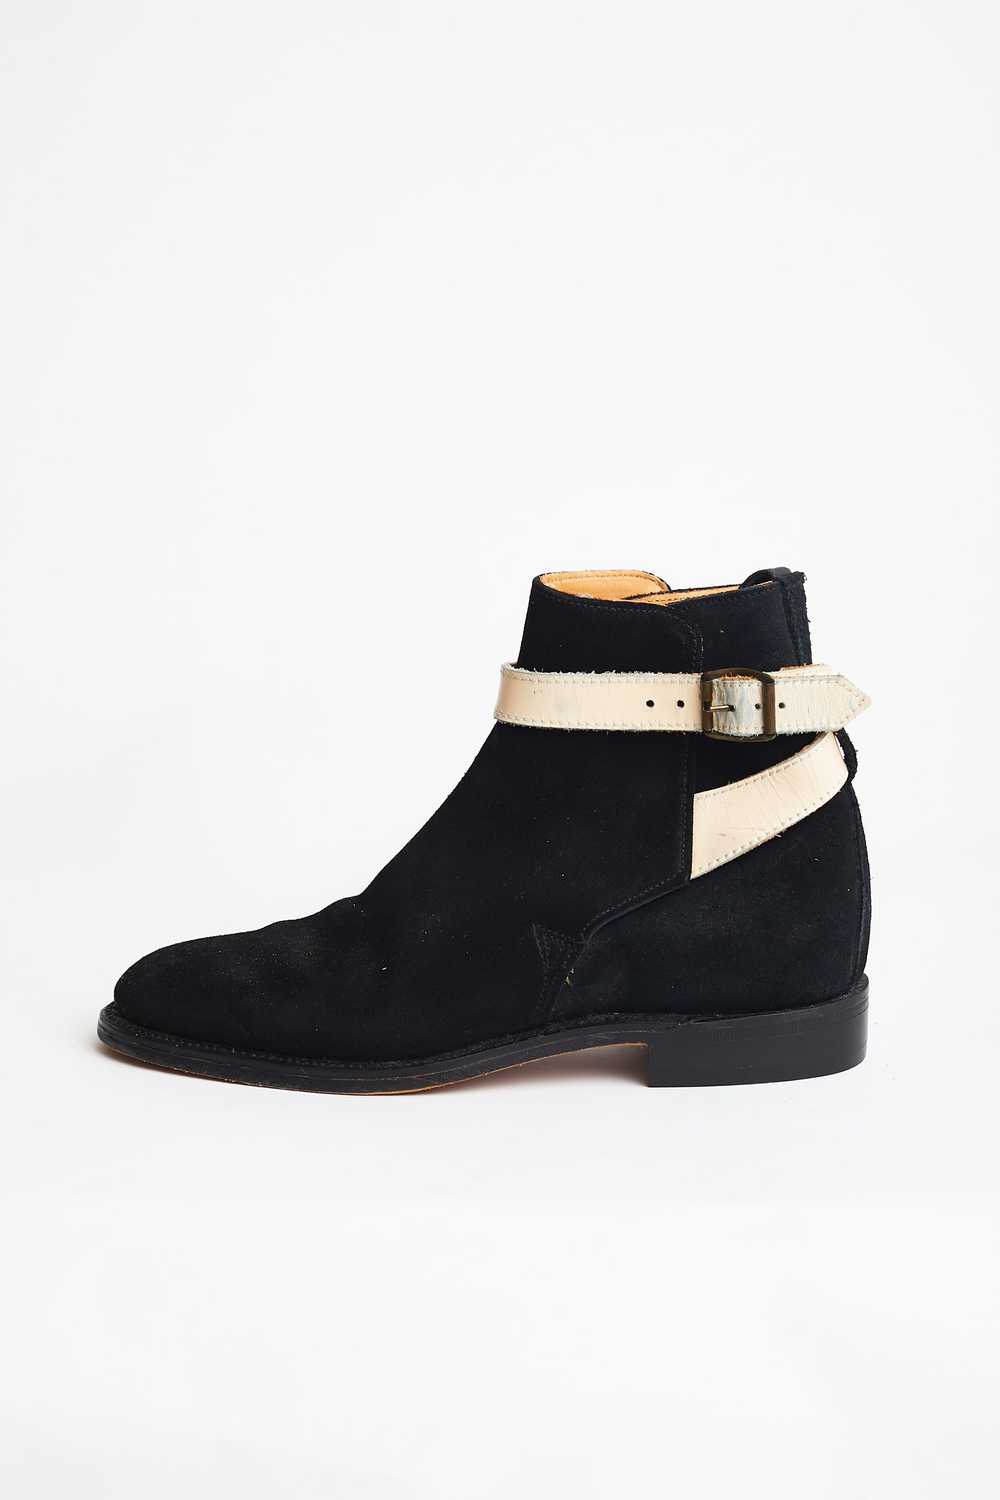 Vivienne Westwood 70's Sex suede Pirate boots - image 3